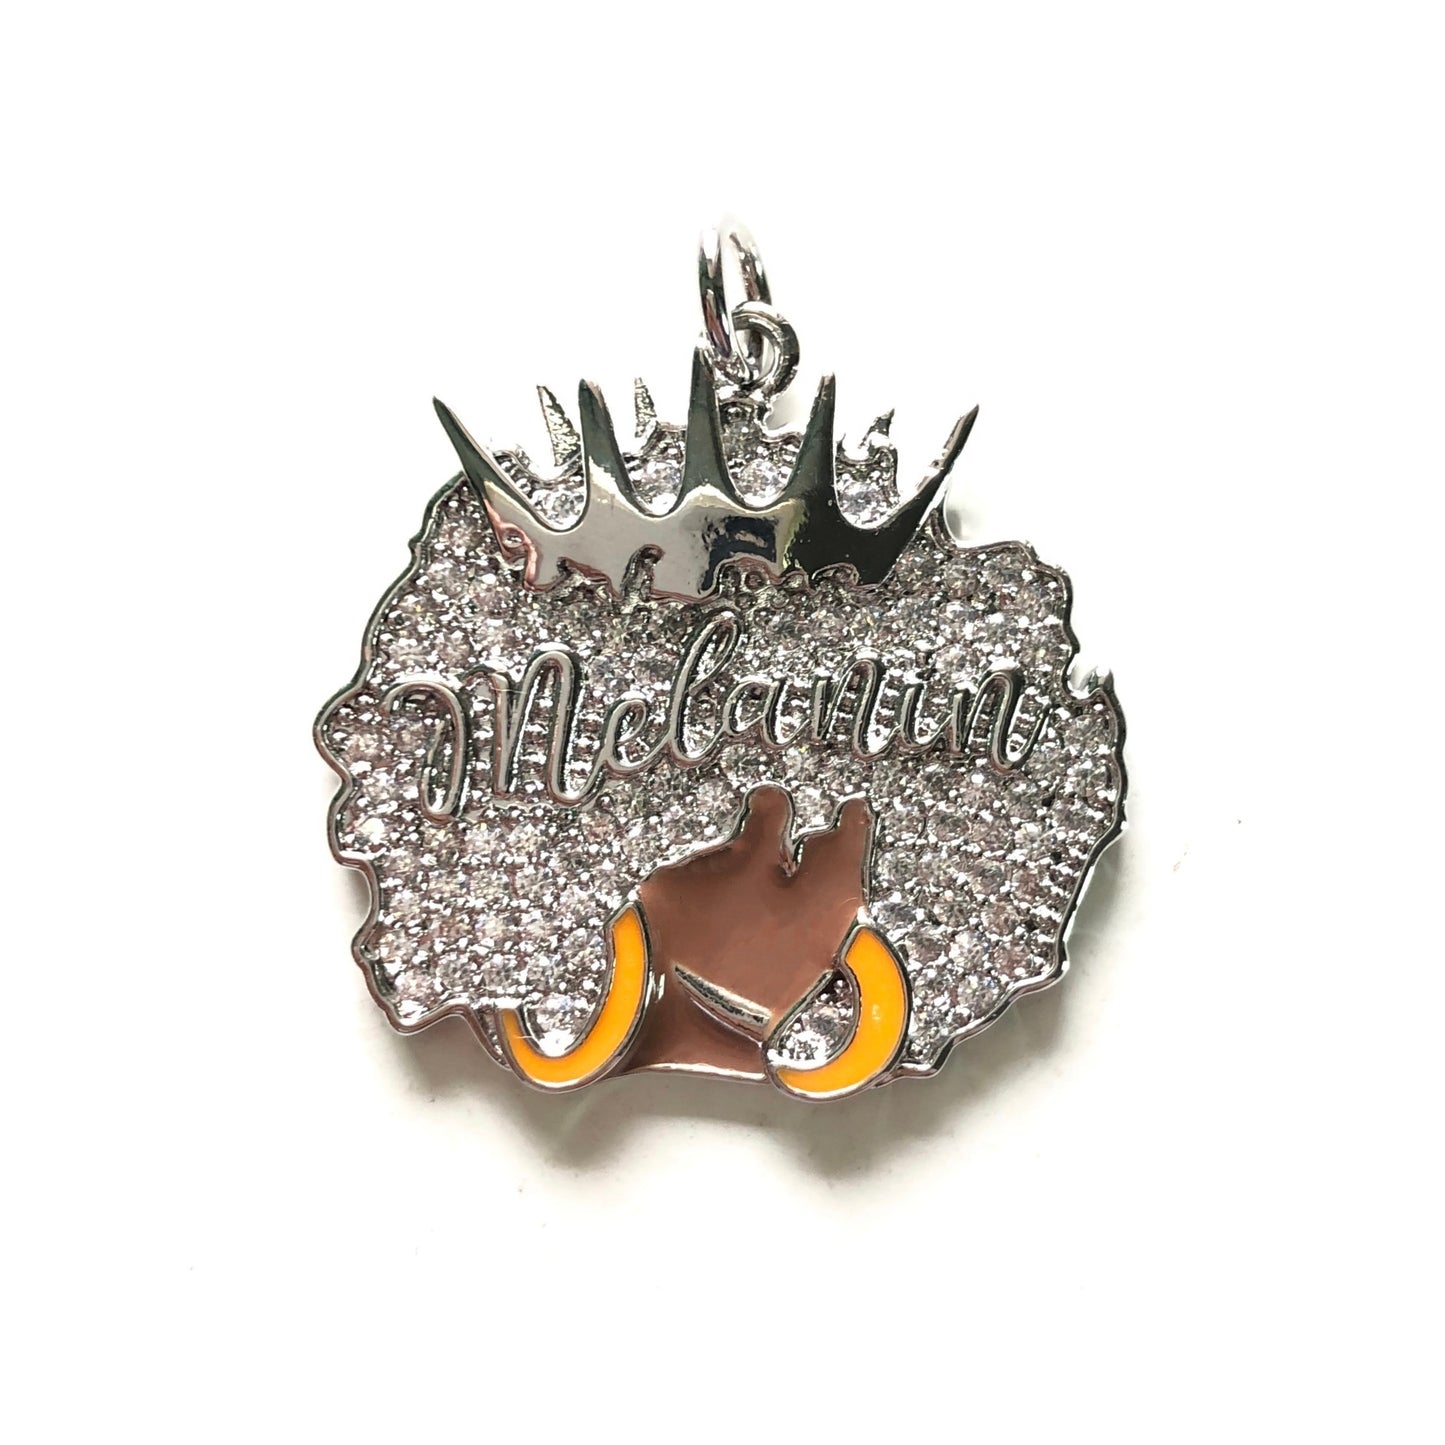 10pcs/lot 29*29mm CZ Paved Crown Queen Melanin Afro Girl Charms CZ Paved Charms Afro Girl/Queen Charms Charms Beads Beyond